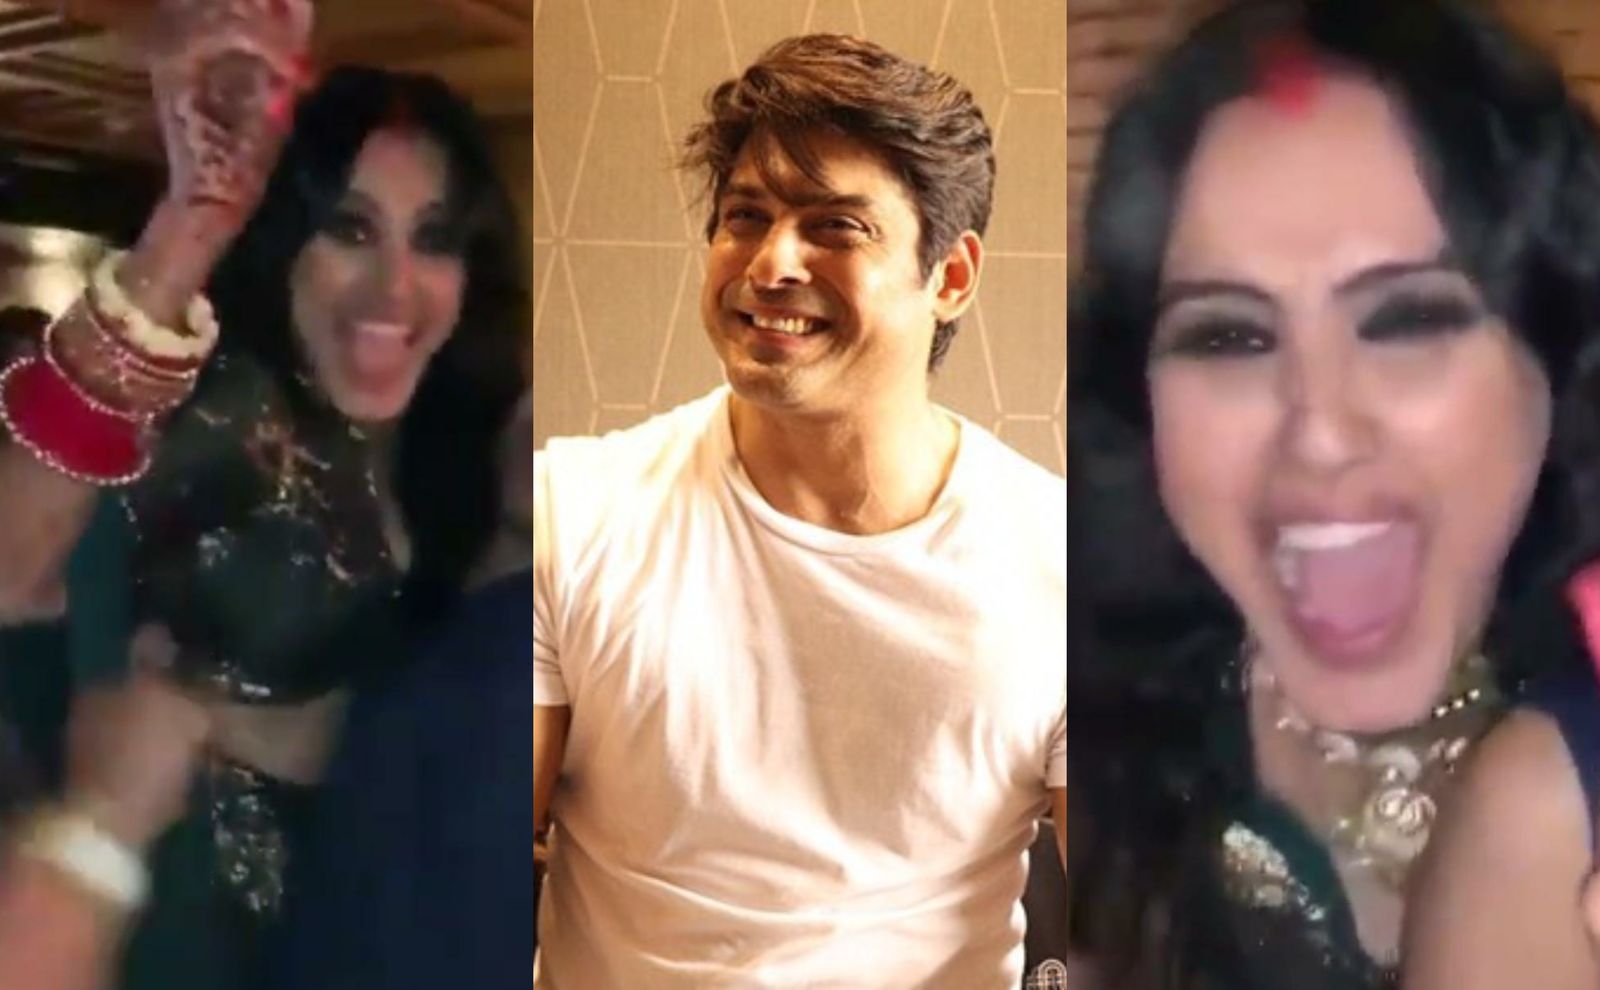 Bigg Boss 13: Kamya Panjabi Campaigns For Sidharth Shukla  At Her Wedding Reception, Asks Guests To Vote; Watch